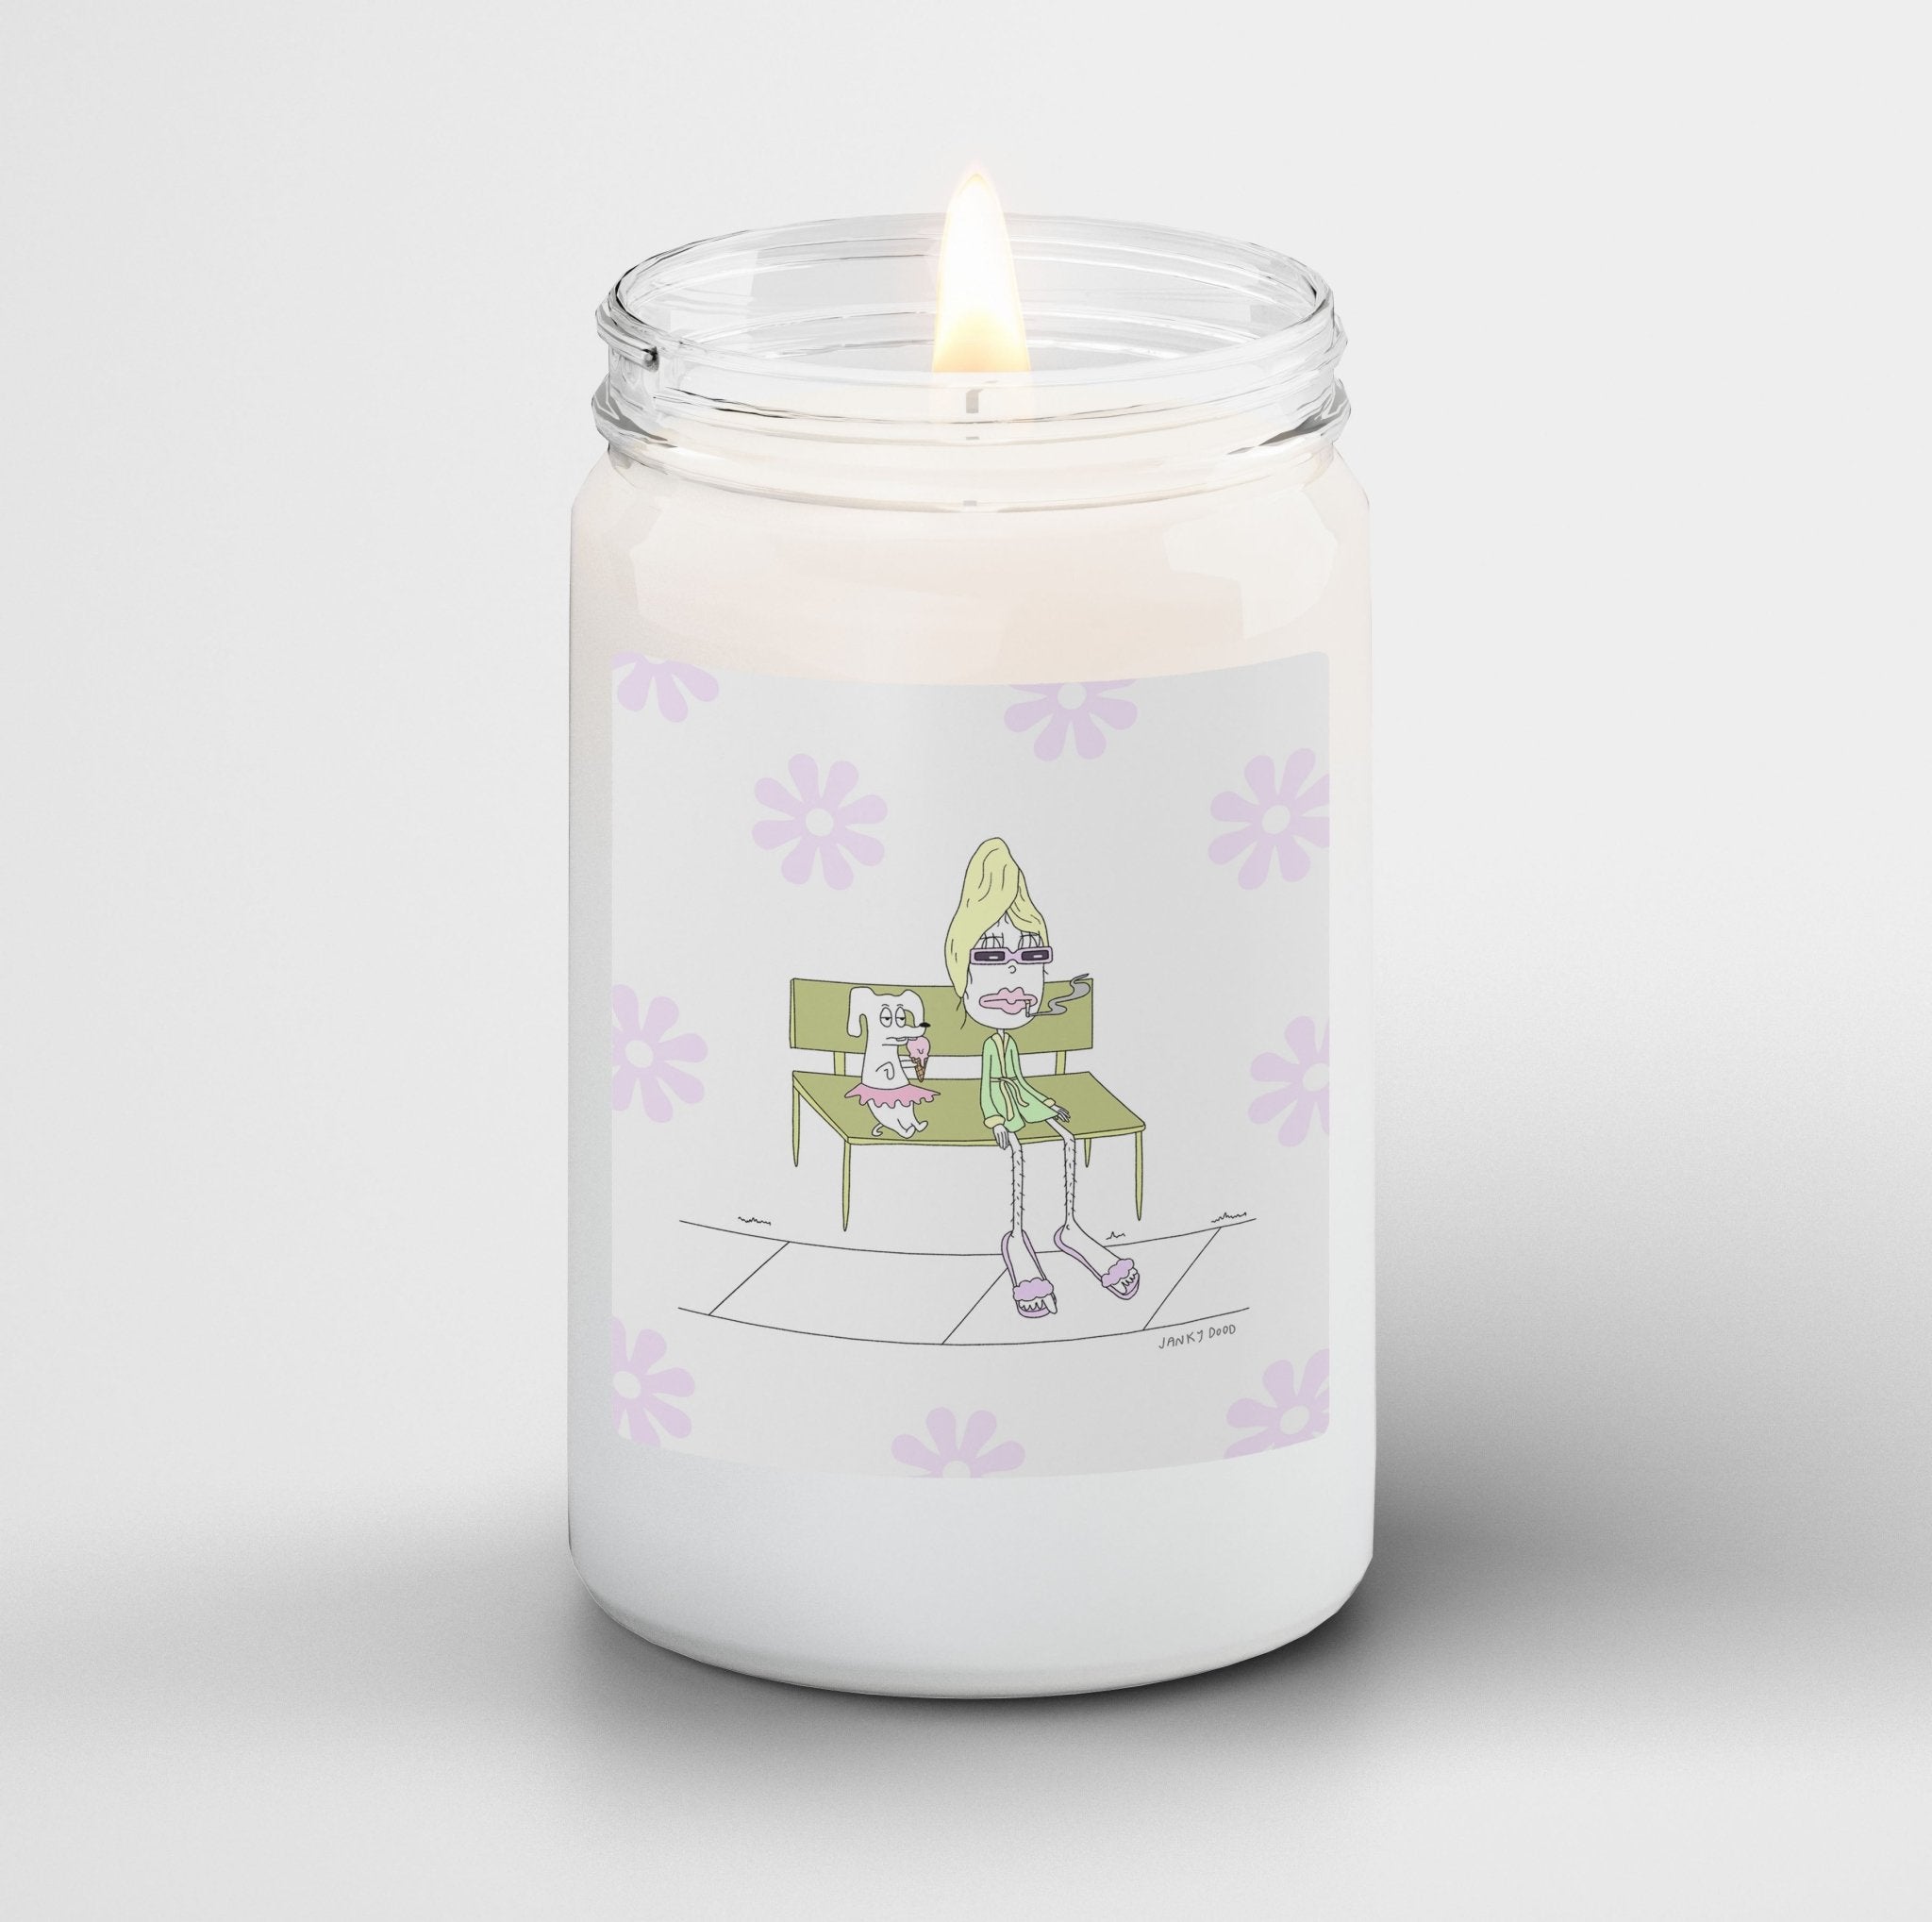 Janky Dood Scented Candle in Mason Jar: Bench Chillin - Candlefy